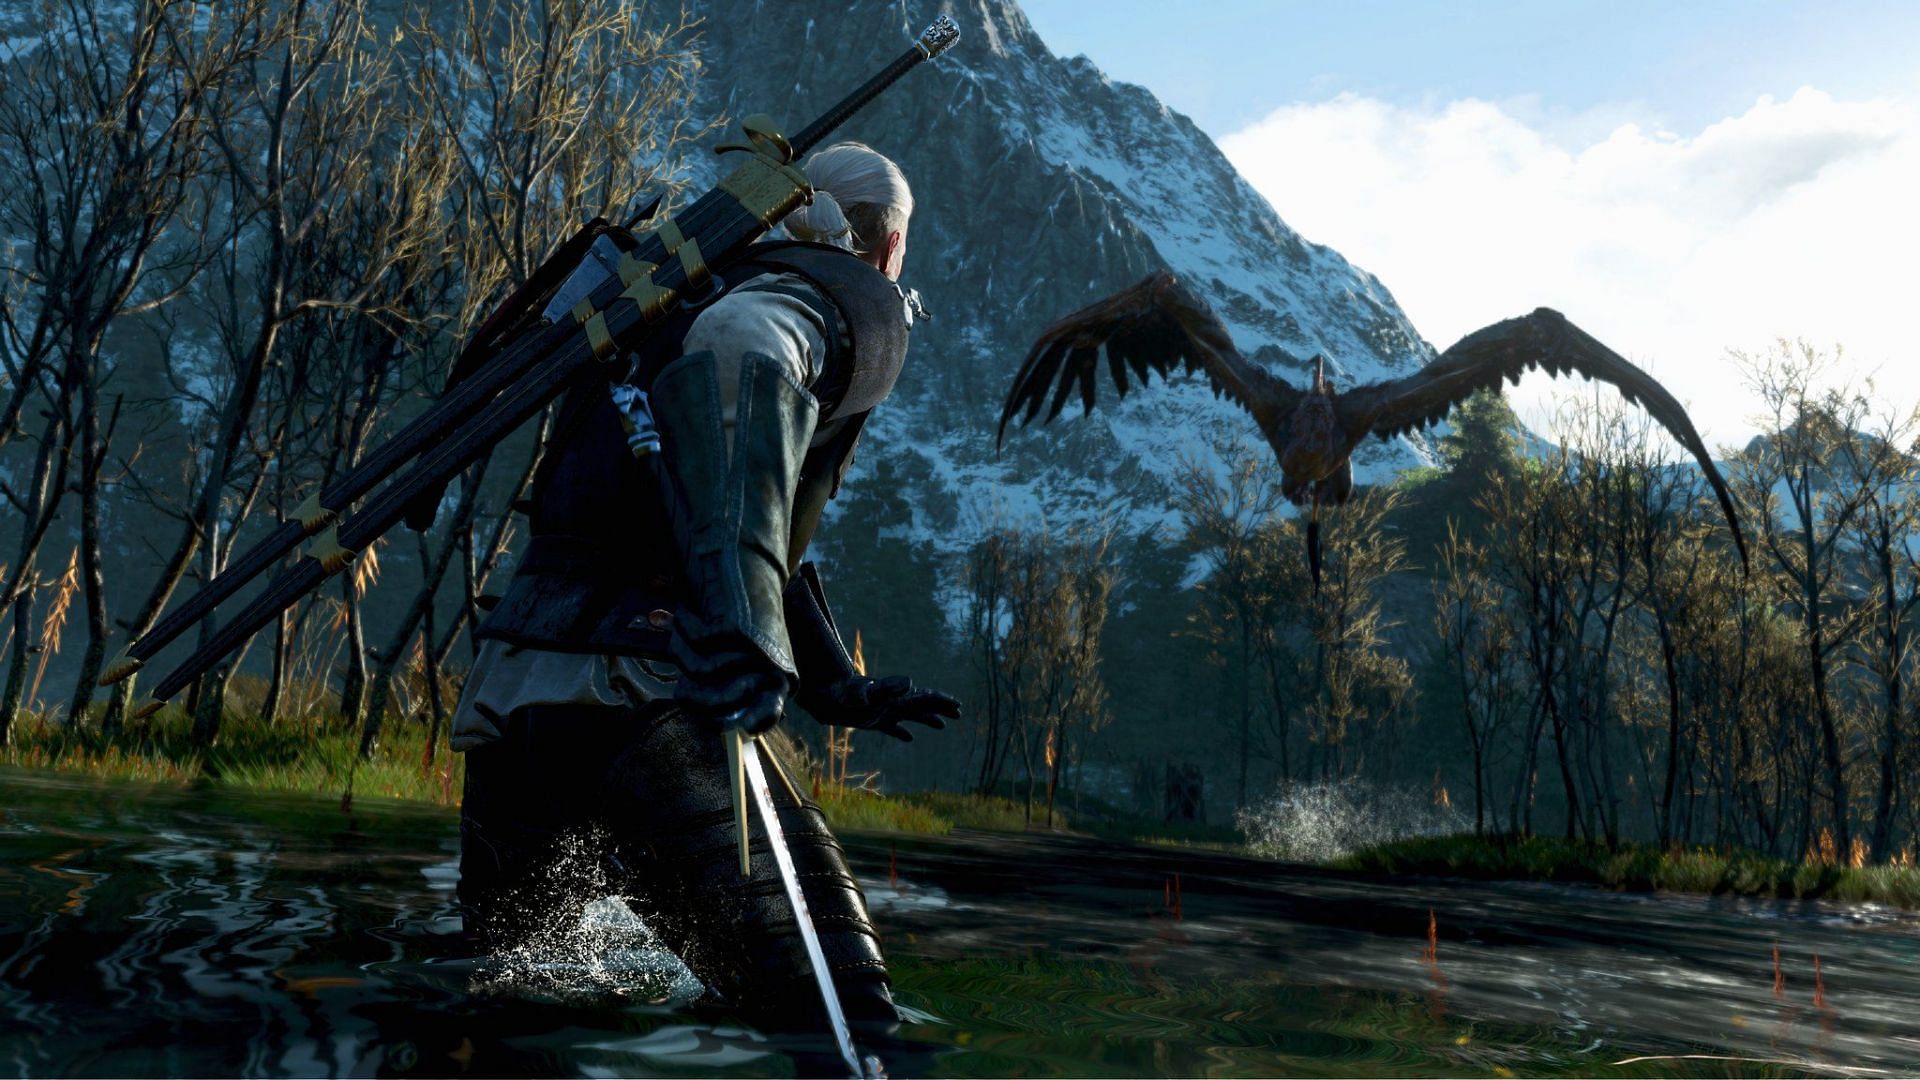 Exploring the Isles of Skellige in The Witcher 3 (Image via Twitter/@_Virtualtourism)sm)